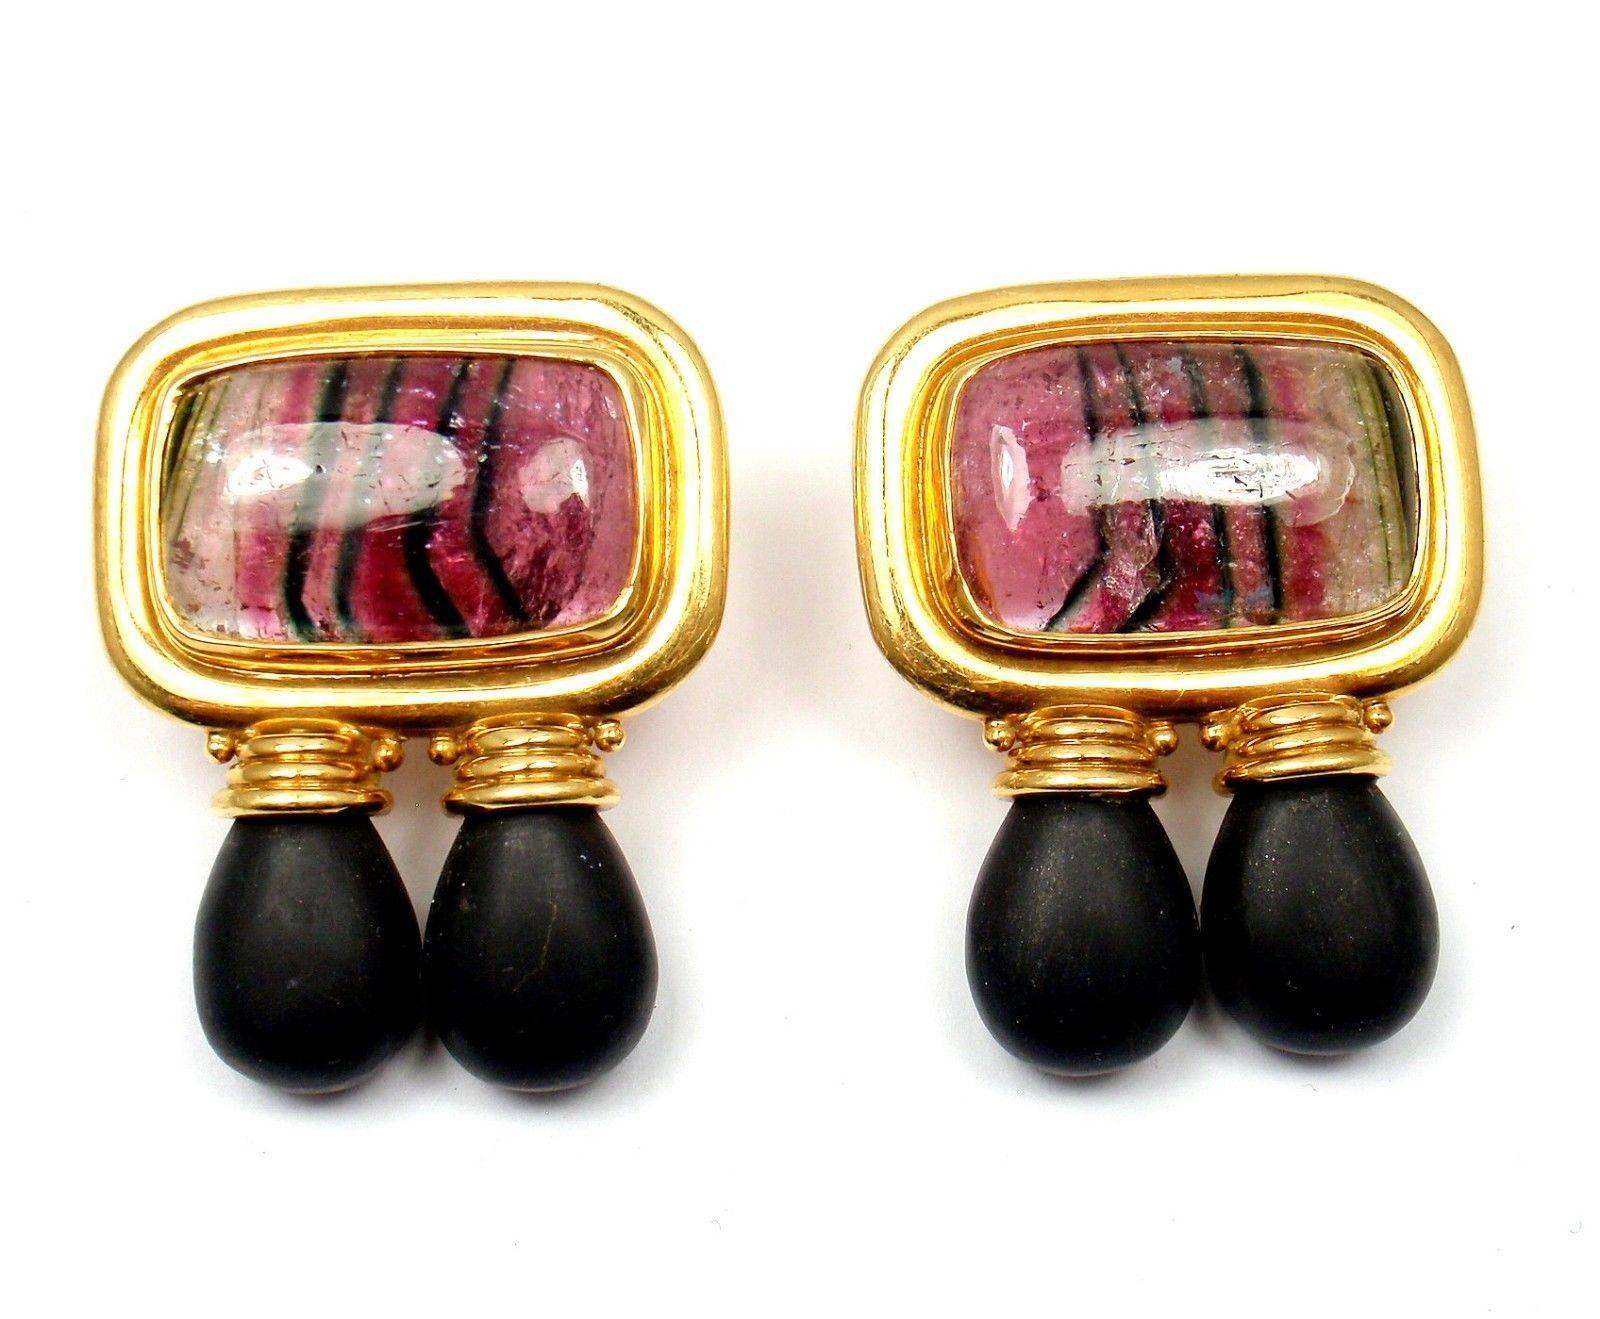 18k Yellow Gold Ebony Wood And Watermelon Tourmaline Earrings by Elizabeth Gage. 
With 2x Watermelon Tourmalines: 13mm x 22mm
4x Ebony Wood Pieces: 8mm x 10mm x 12mm

Details:
Measurements: 31mm x 39.5mm
Weight:  43.4 grams
These earrings are to non